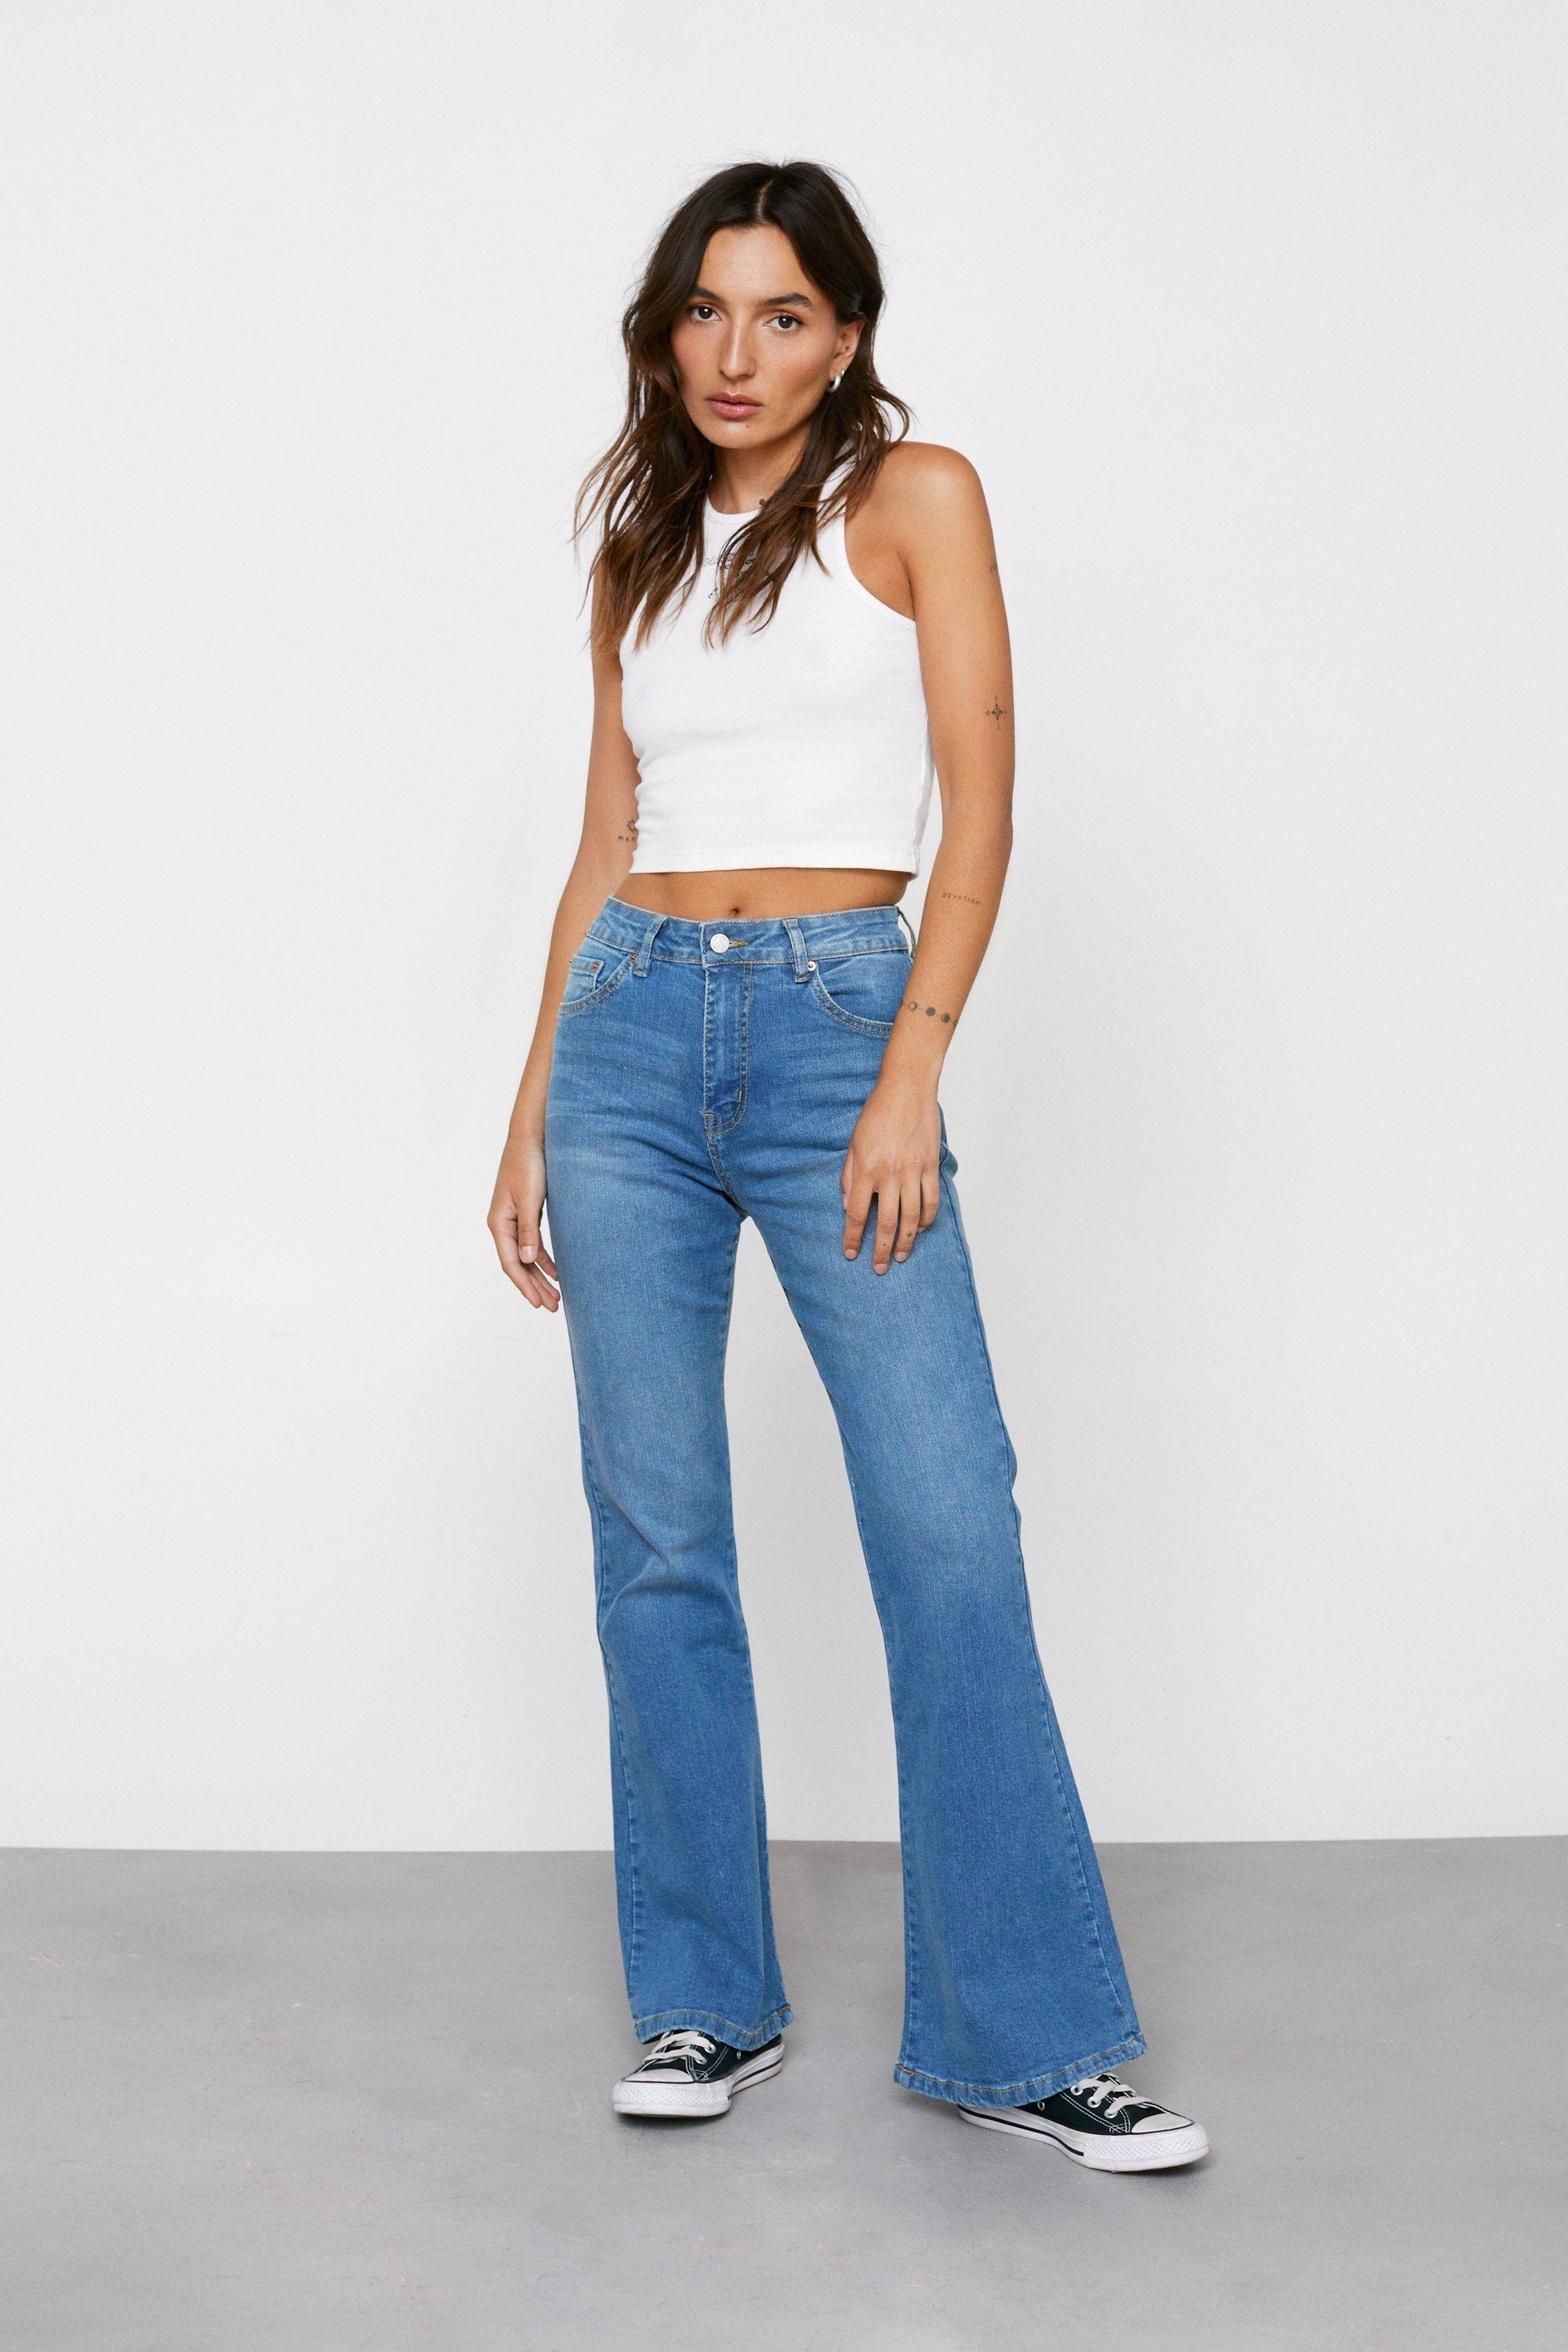 The Best Flare Jeans for Petite Gals